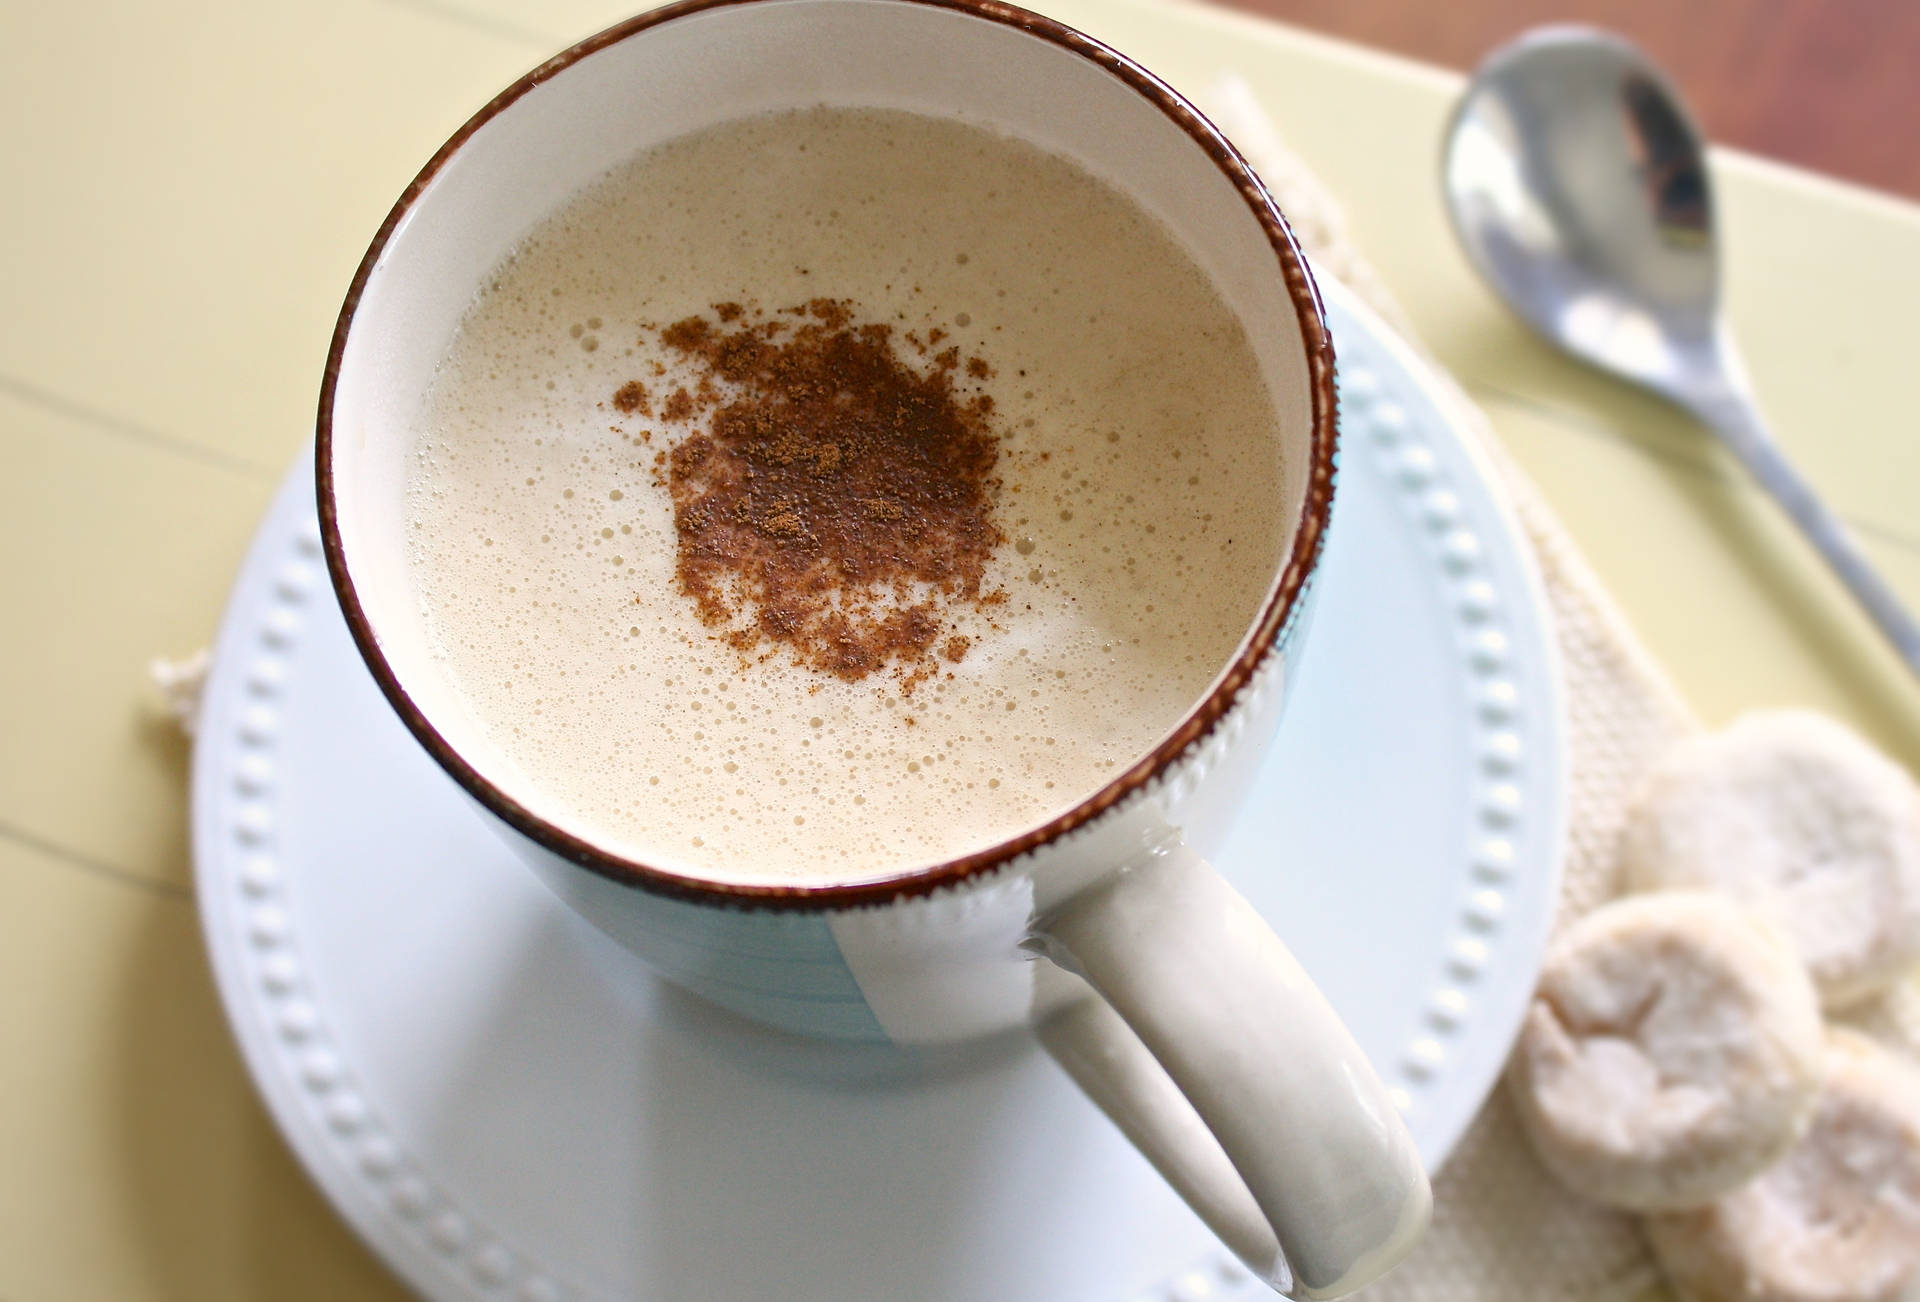 A Steaming Cup Of Freshly Brewed Cinnamon-flavored Coffee With A Creamy Layer Of Foam Background